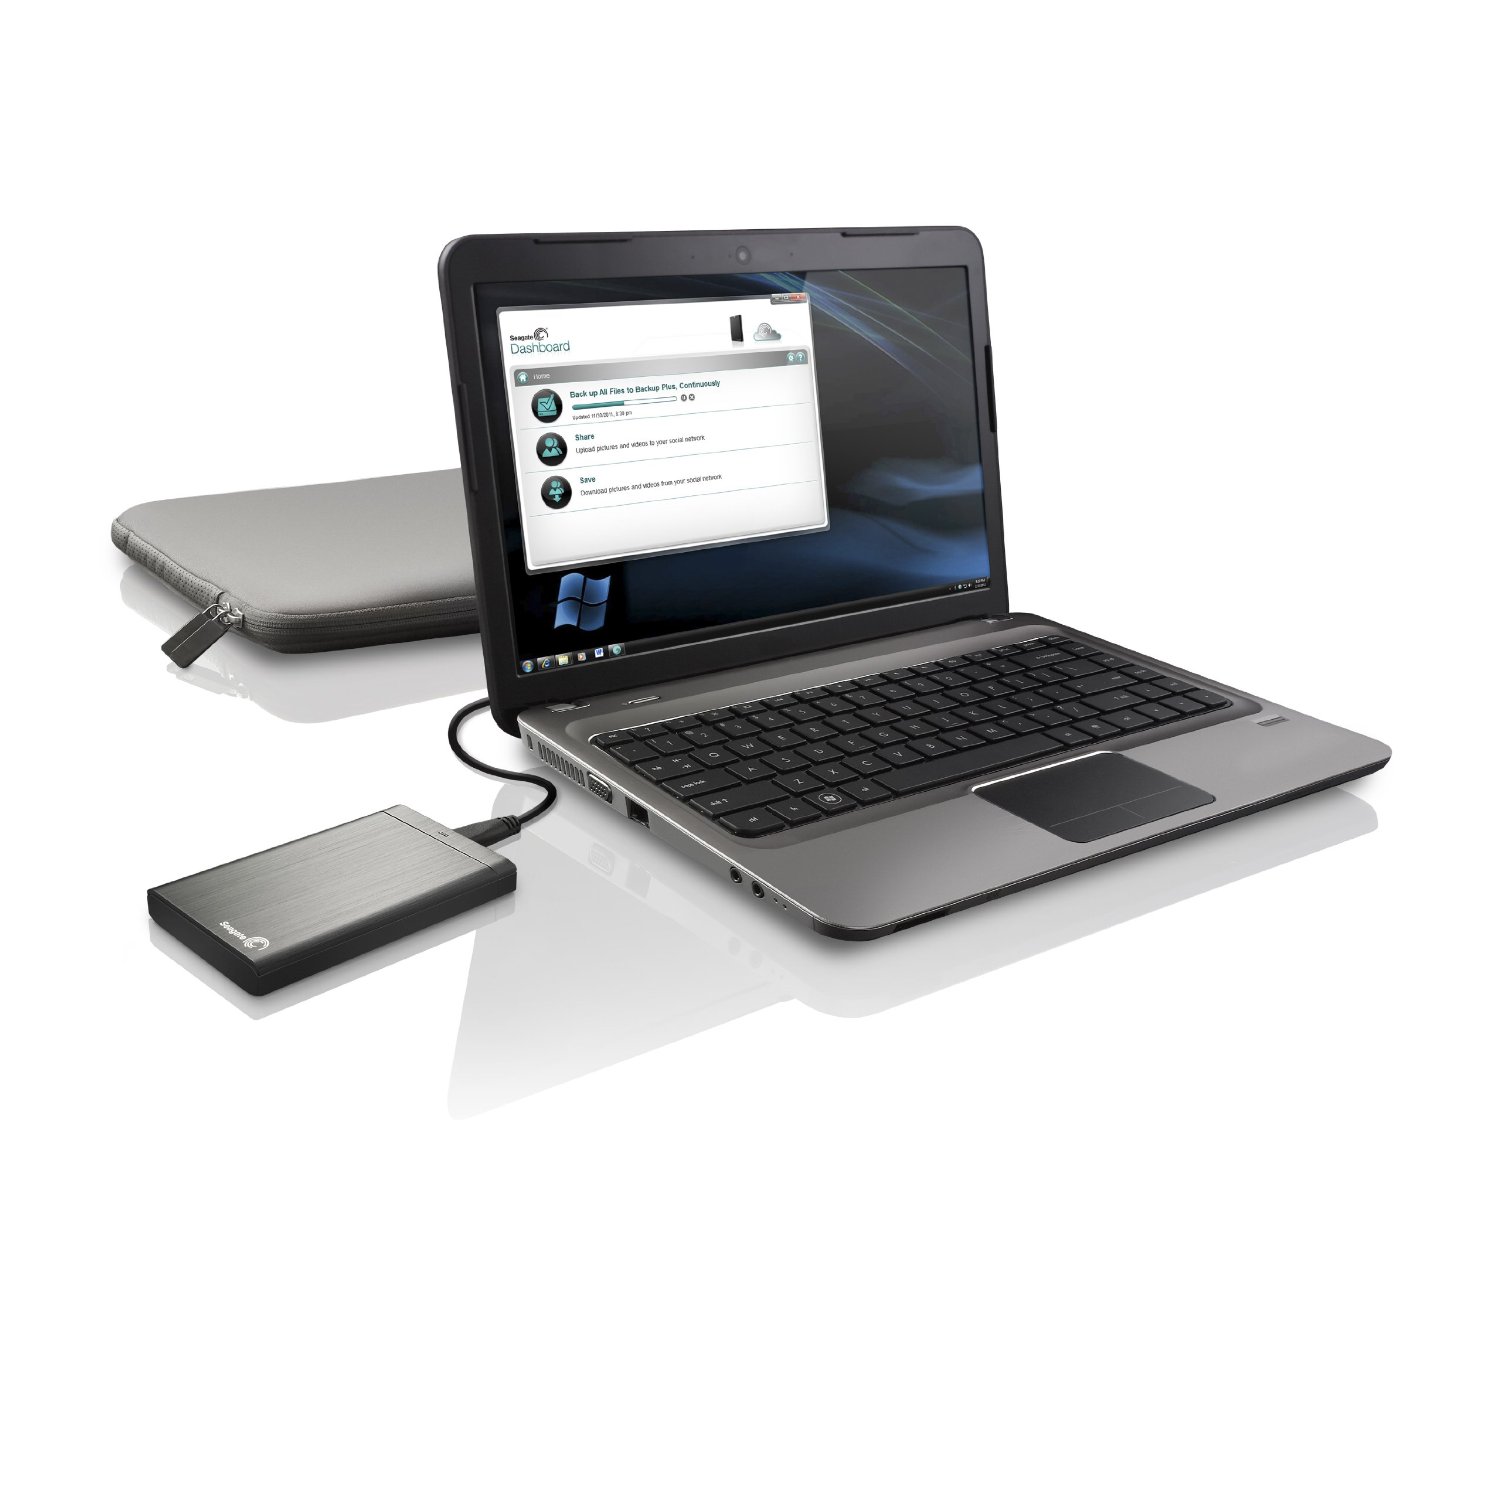 http://thetechjournal.com/wp-content/uploads/images/1206/1340438434-seagate-backup-plus-1-terabyte-portable-hard-drive-for-109-8.jpg